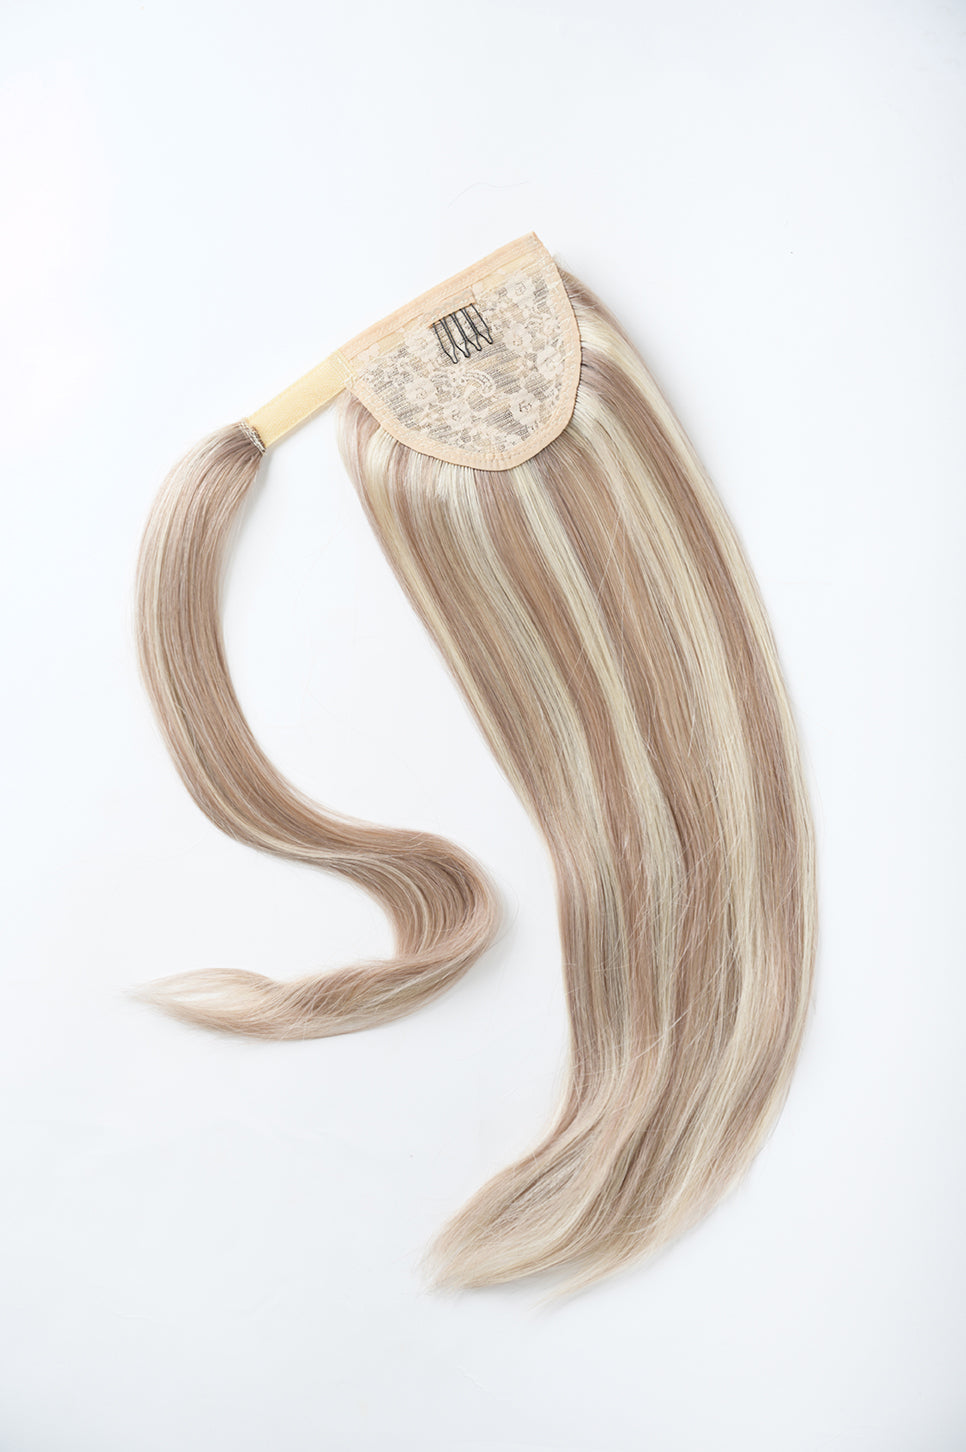 #18/613 Ash Blonde Highlights Ponytail Extensions